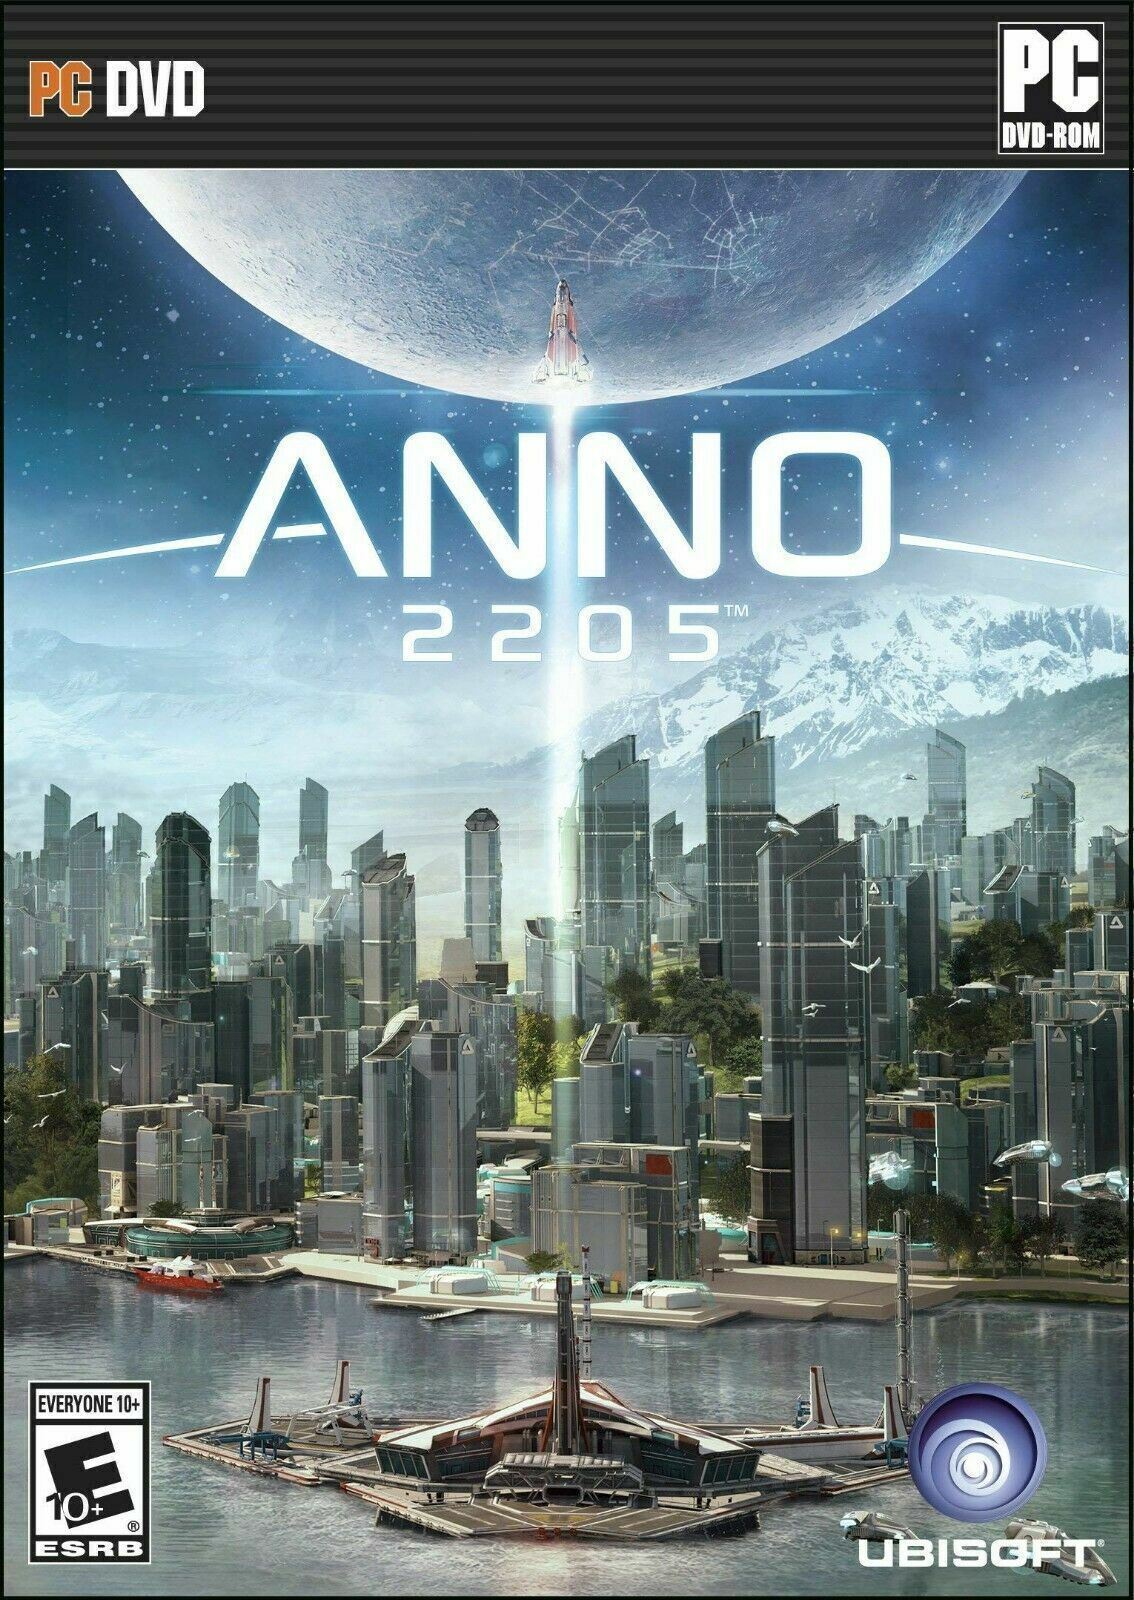 Anno 2205 Ubisoft PC DVD-ROM Software Standard Edition UBP60801064 Complete - $11.24